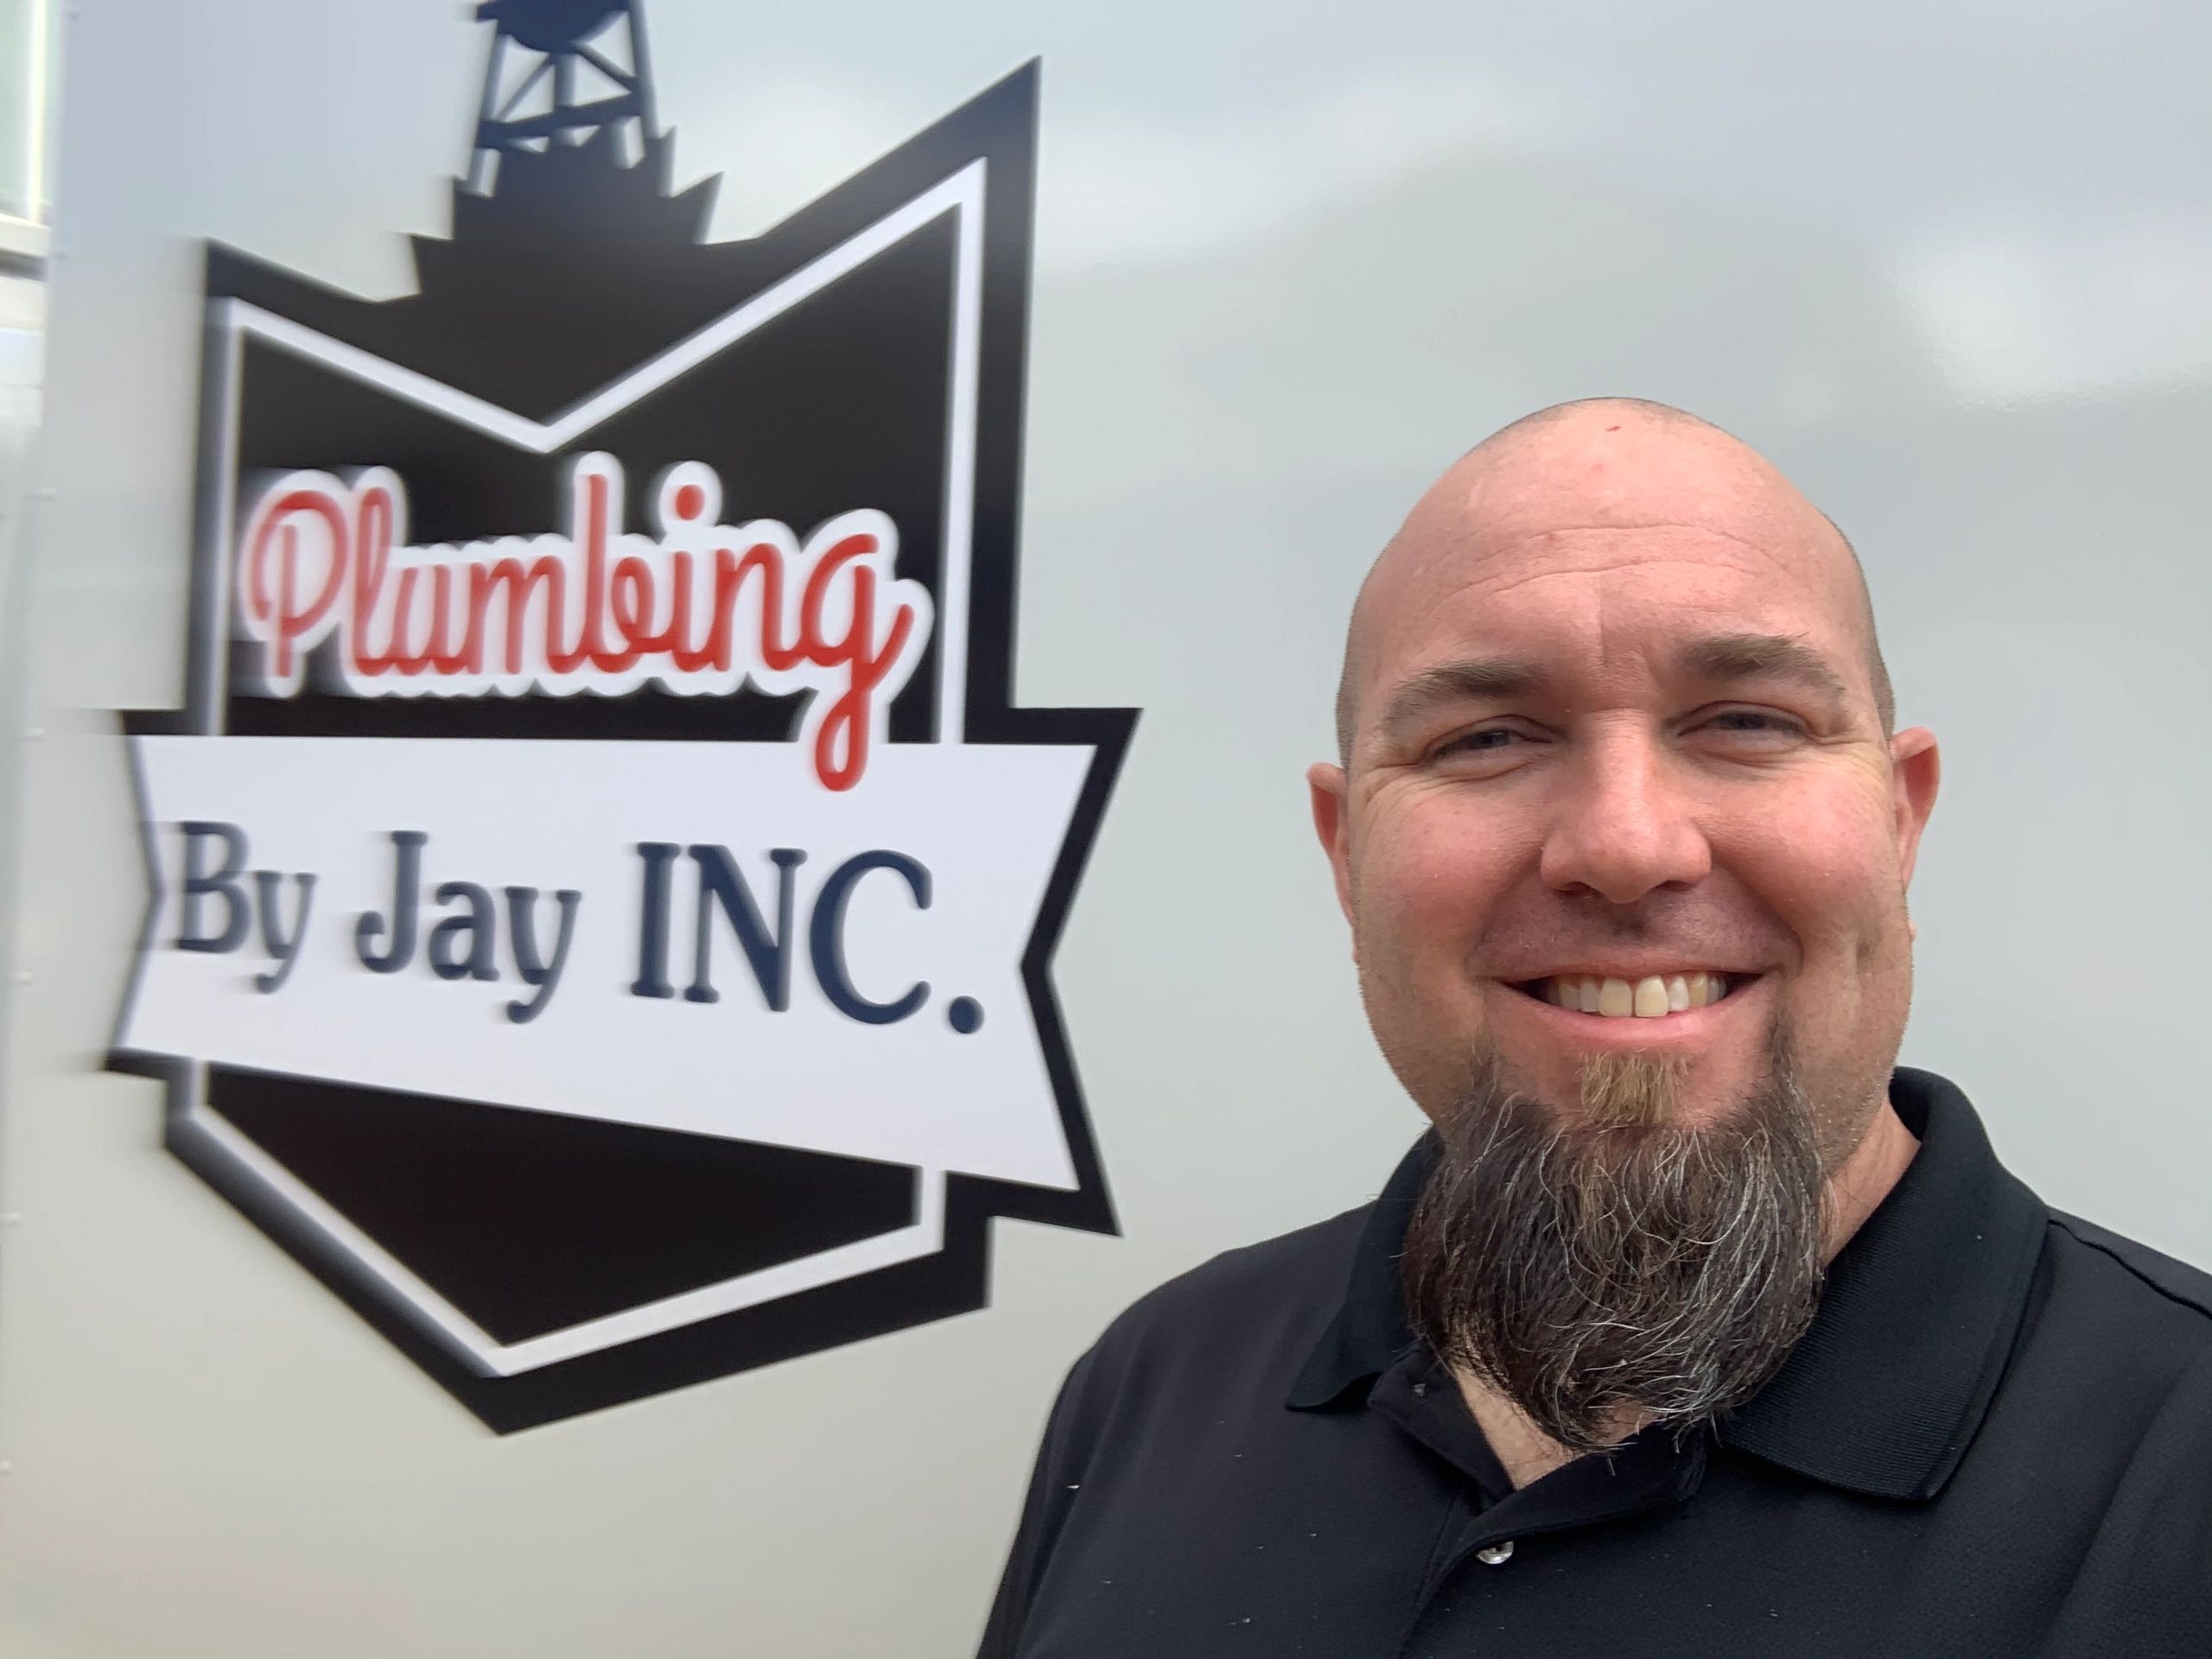 Plumbing by Jay